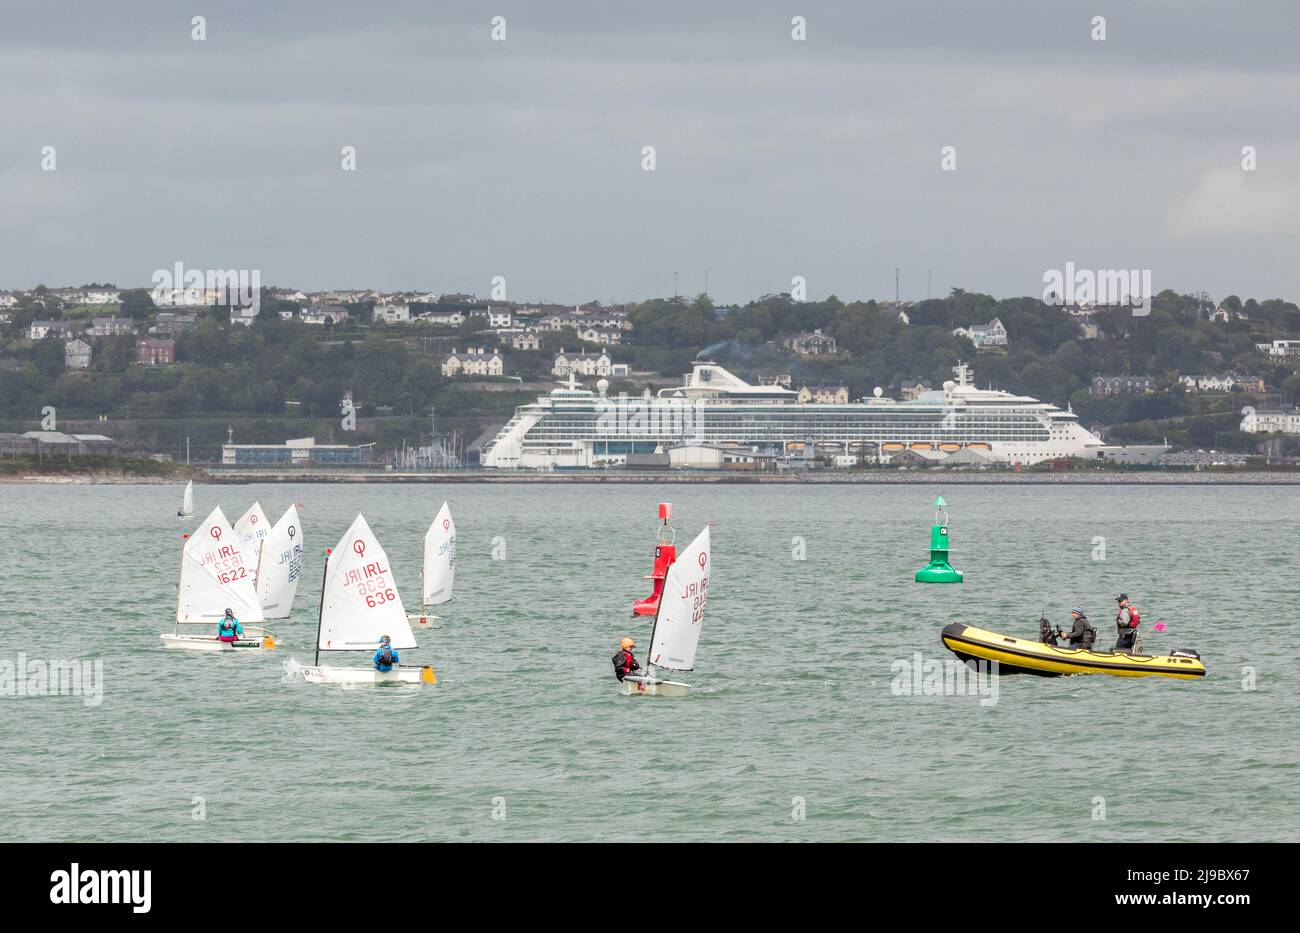 Crosshaven, Cork, Ireland. 22nd May, 2022. Against a background of the cruise ship Jewel of the Seas some of the competitors taking part in the IODAI Optimist Munster Championship  that was held in Crosshaven, Co. Cork, Ireland over the weekend. - Credit; David Creedon / Alamy Live News Stock Photo